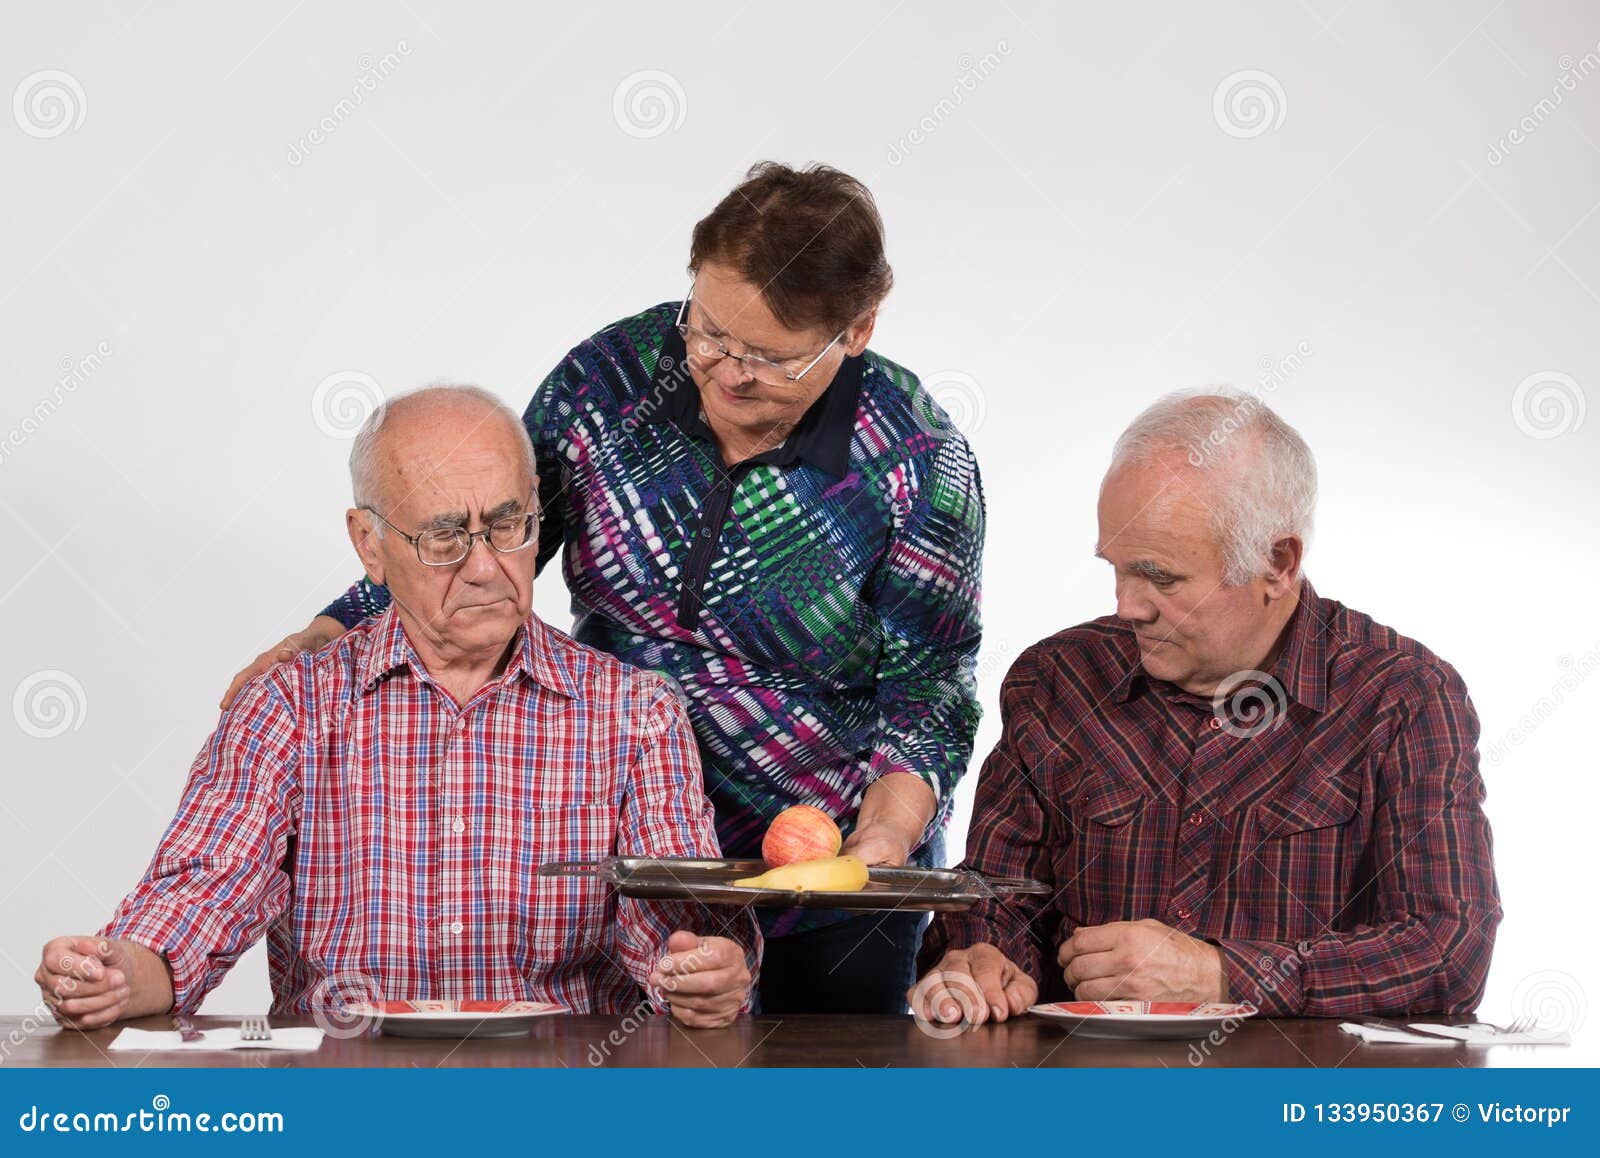 Two men and woman ready for dinner. Two elderly men having discussion, women brings them apple and banana